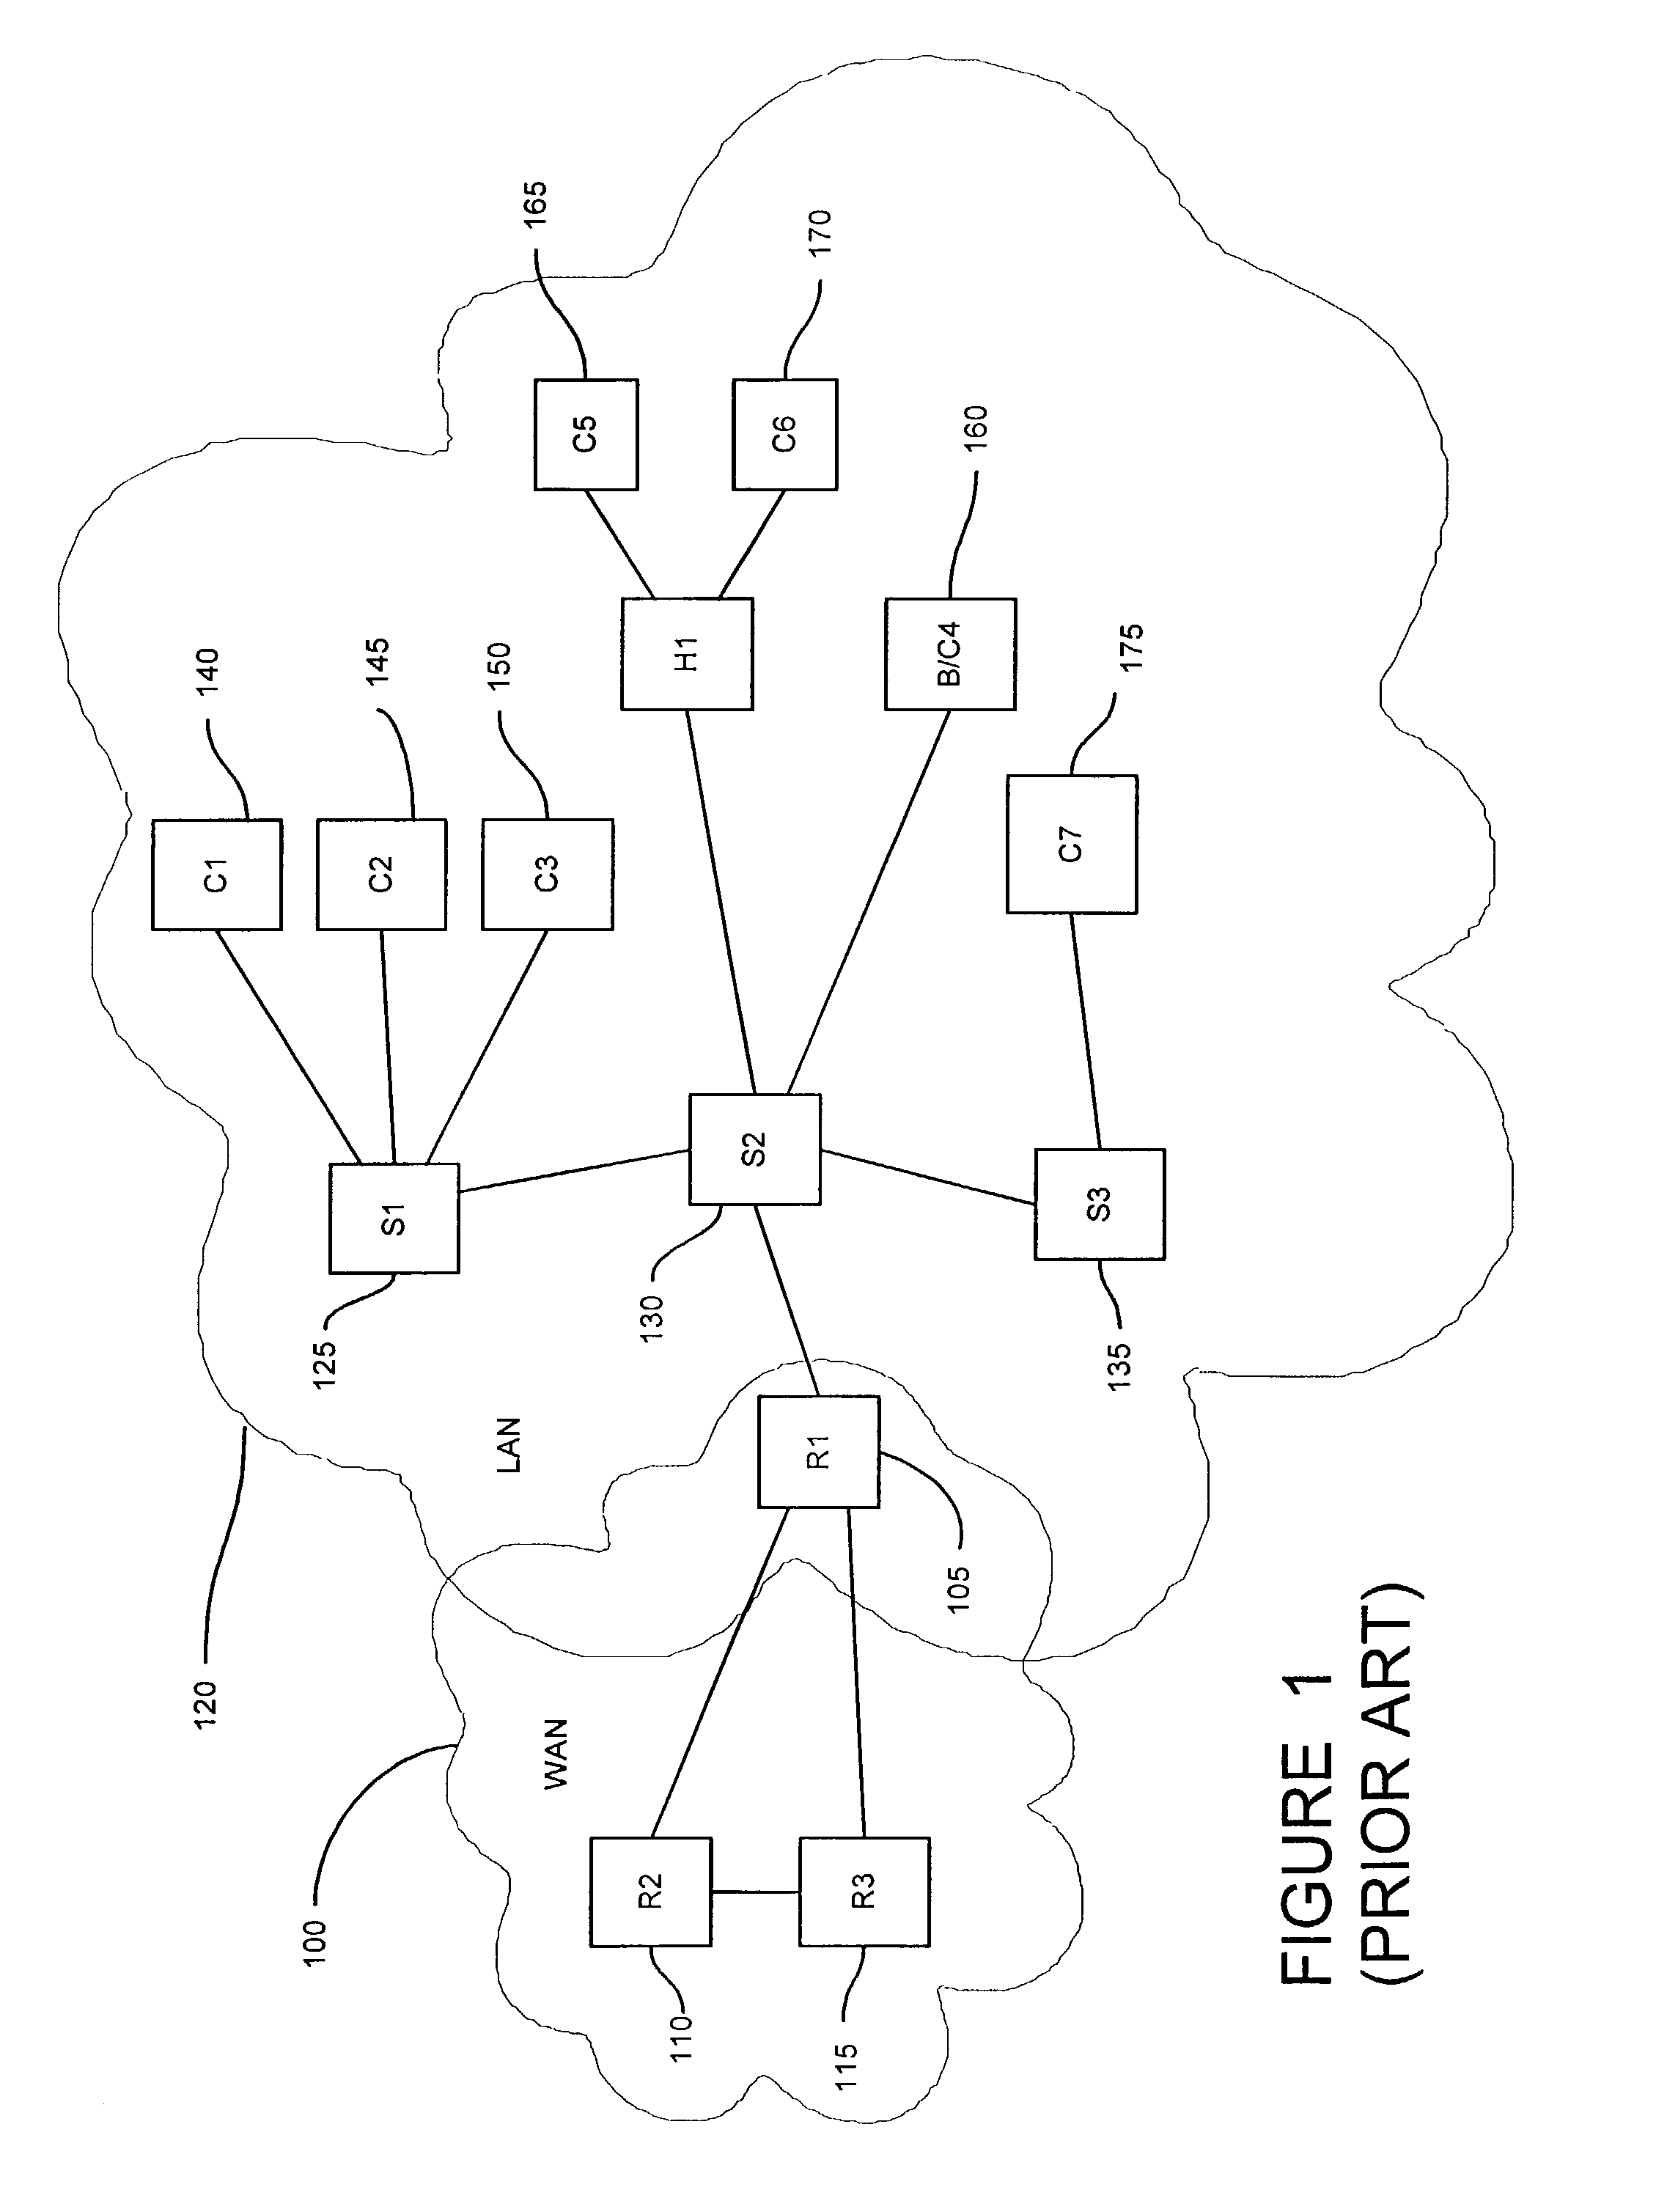 Method and apparatus for capturing and filtering datagrams for network security monitoring